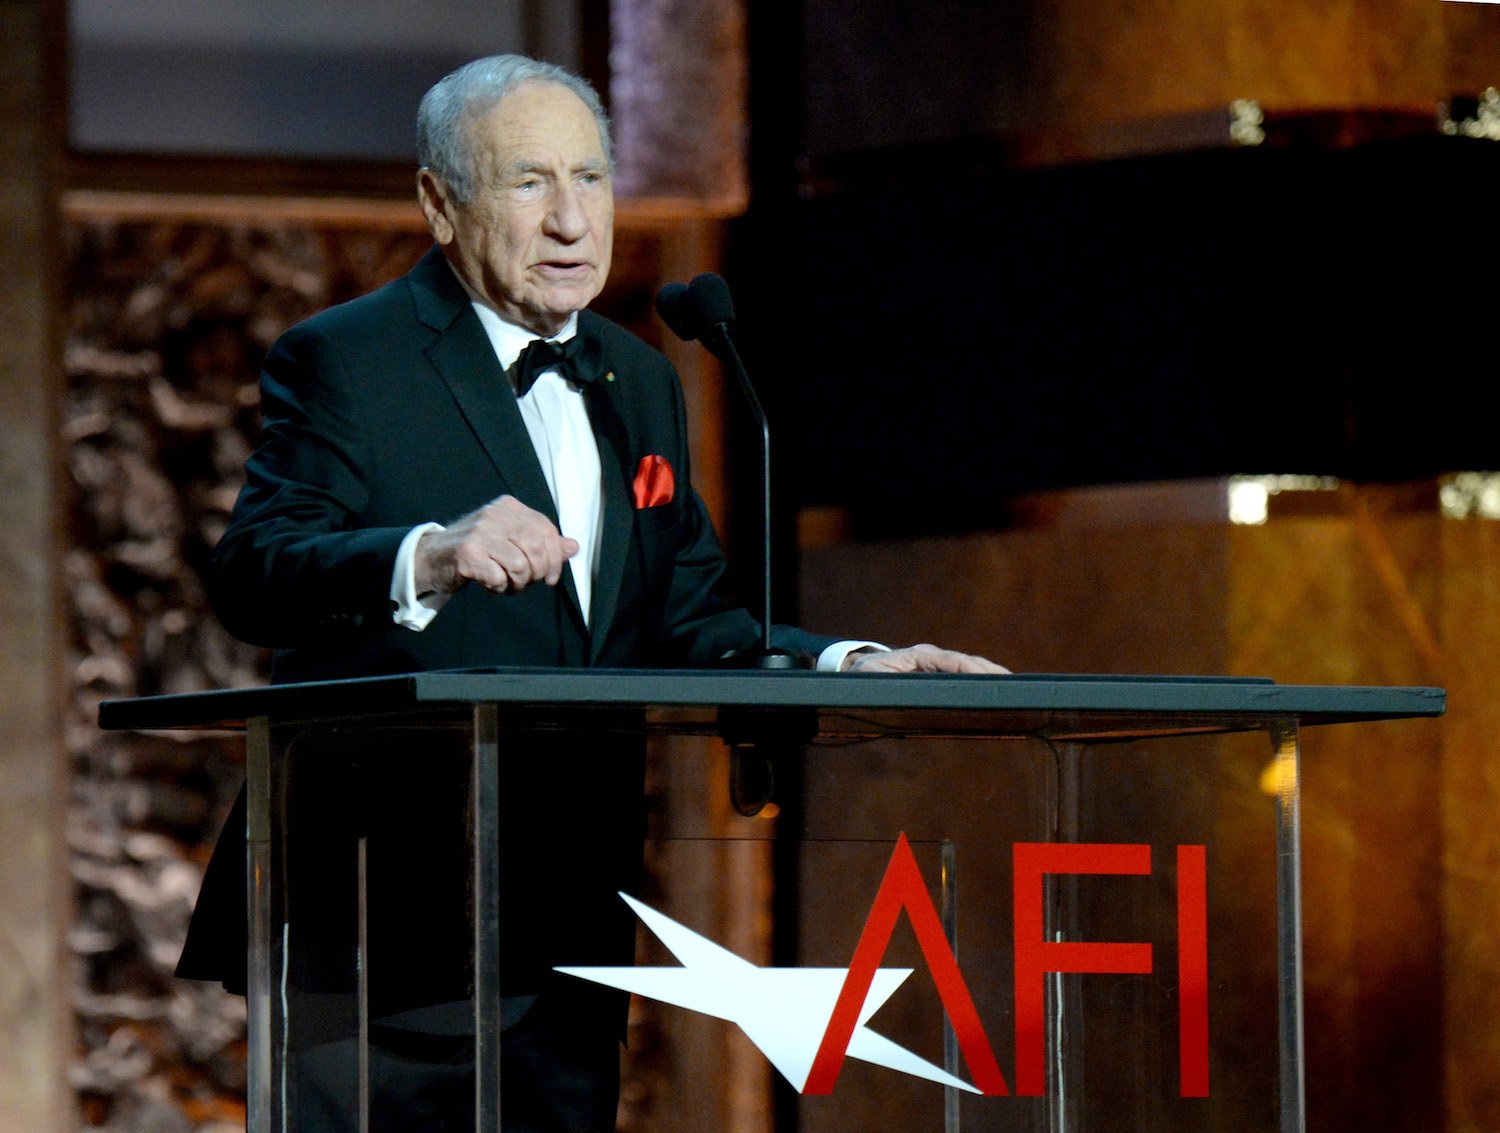 Mel Brooks onstage during the 2014 AFI Life Achievement Award: A Tribute to Jane Fonda at the Dolby Theatre on June 5, 2014 in Hollywood, California. Tribute show airing Saturday, June 14, 2014 at 9pm ET/PT on TNT.